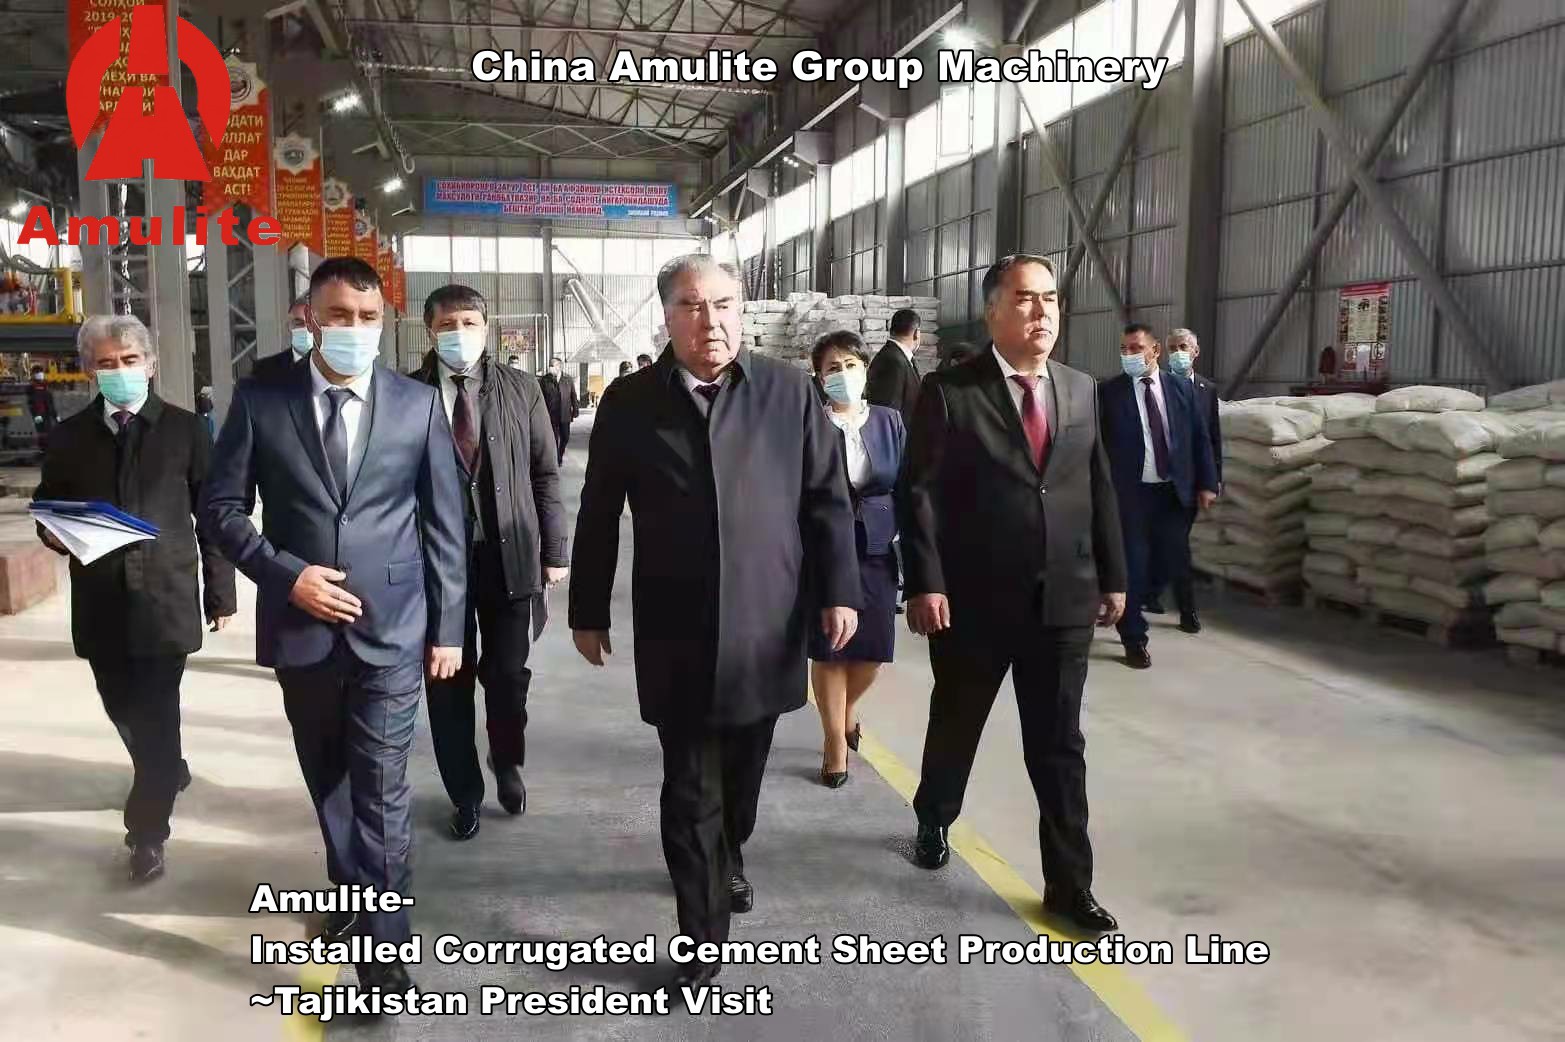 The President Of Tajikistan Visits Our Corrugated Cement Board Production Line